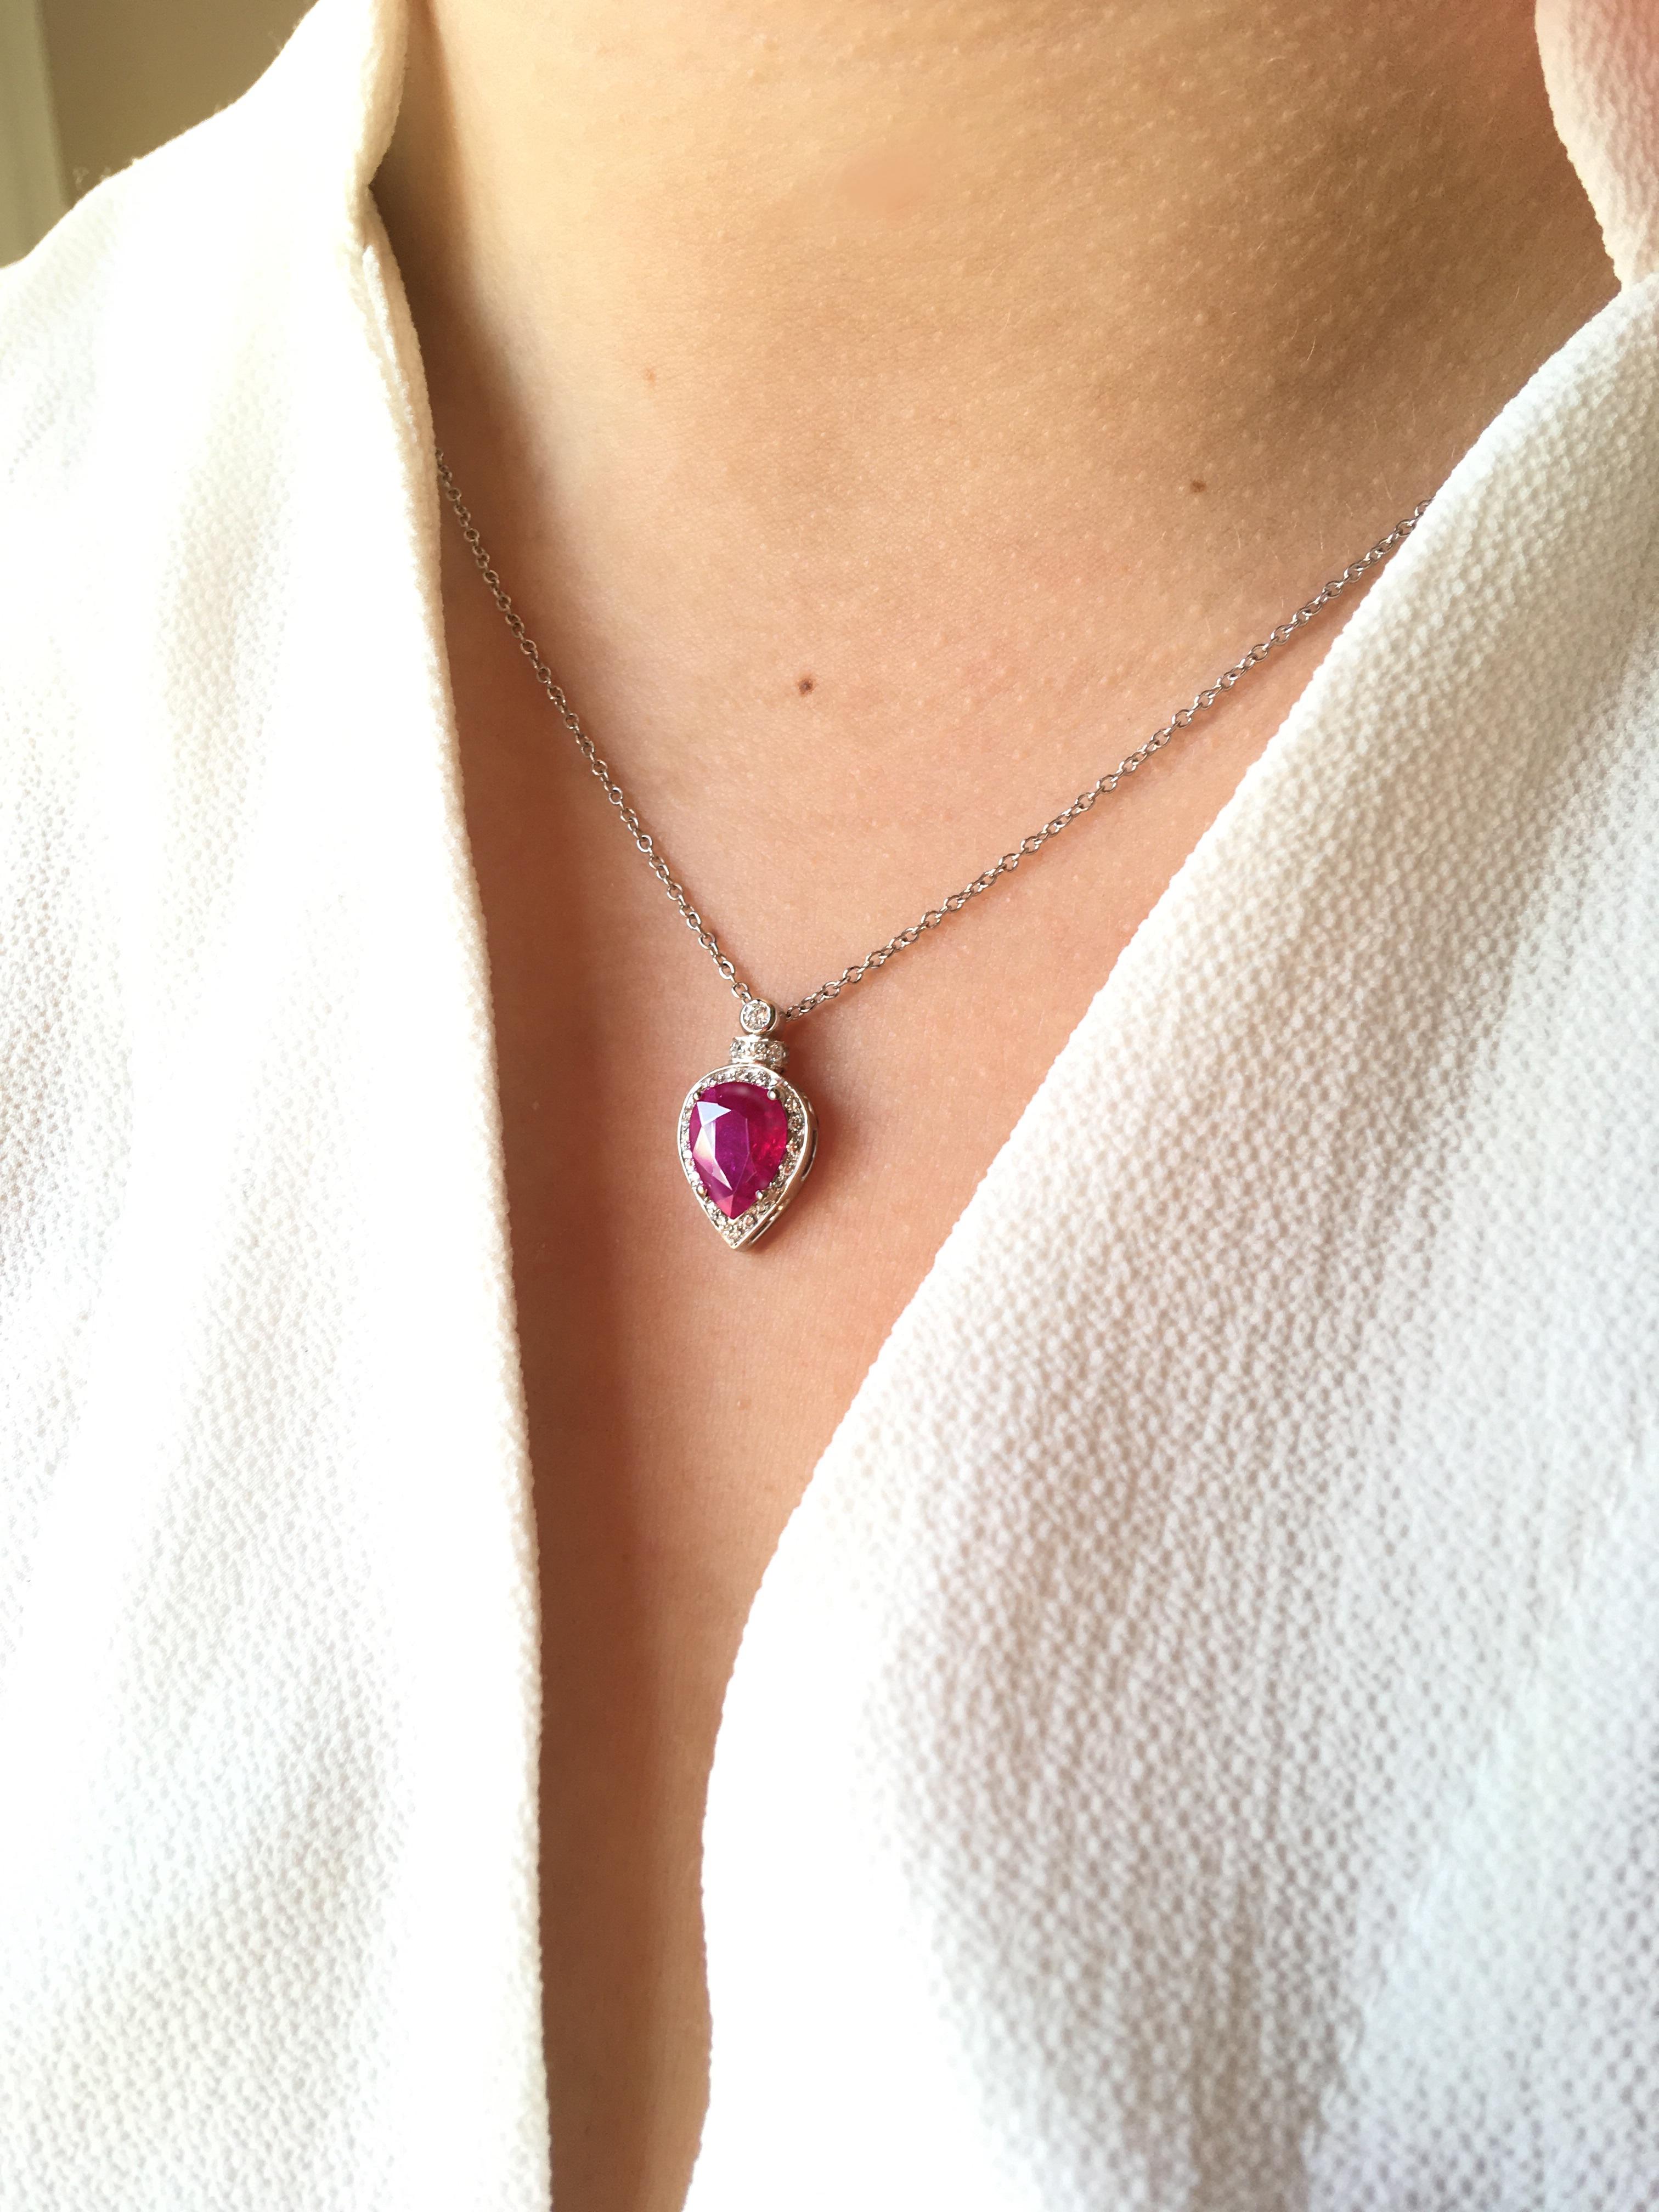 Rossella Ugolini Design Collection, a beautiful 2.60 Karat Ruby 0,20 White Diamonds 18 Karat White Gold Chain Modern Necklace. Ruby is present in our imagination for its red color, a shade that evokes passion, love and vital energy.
This drop ruby